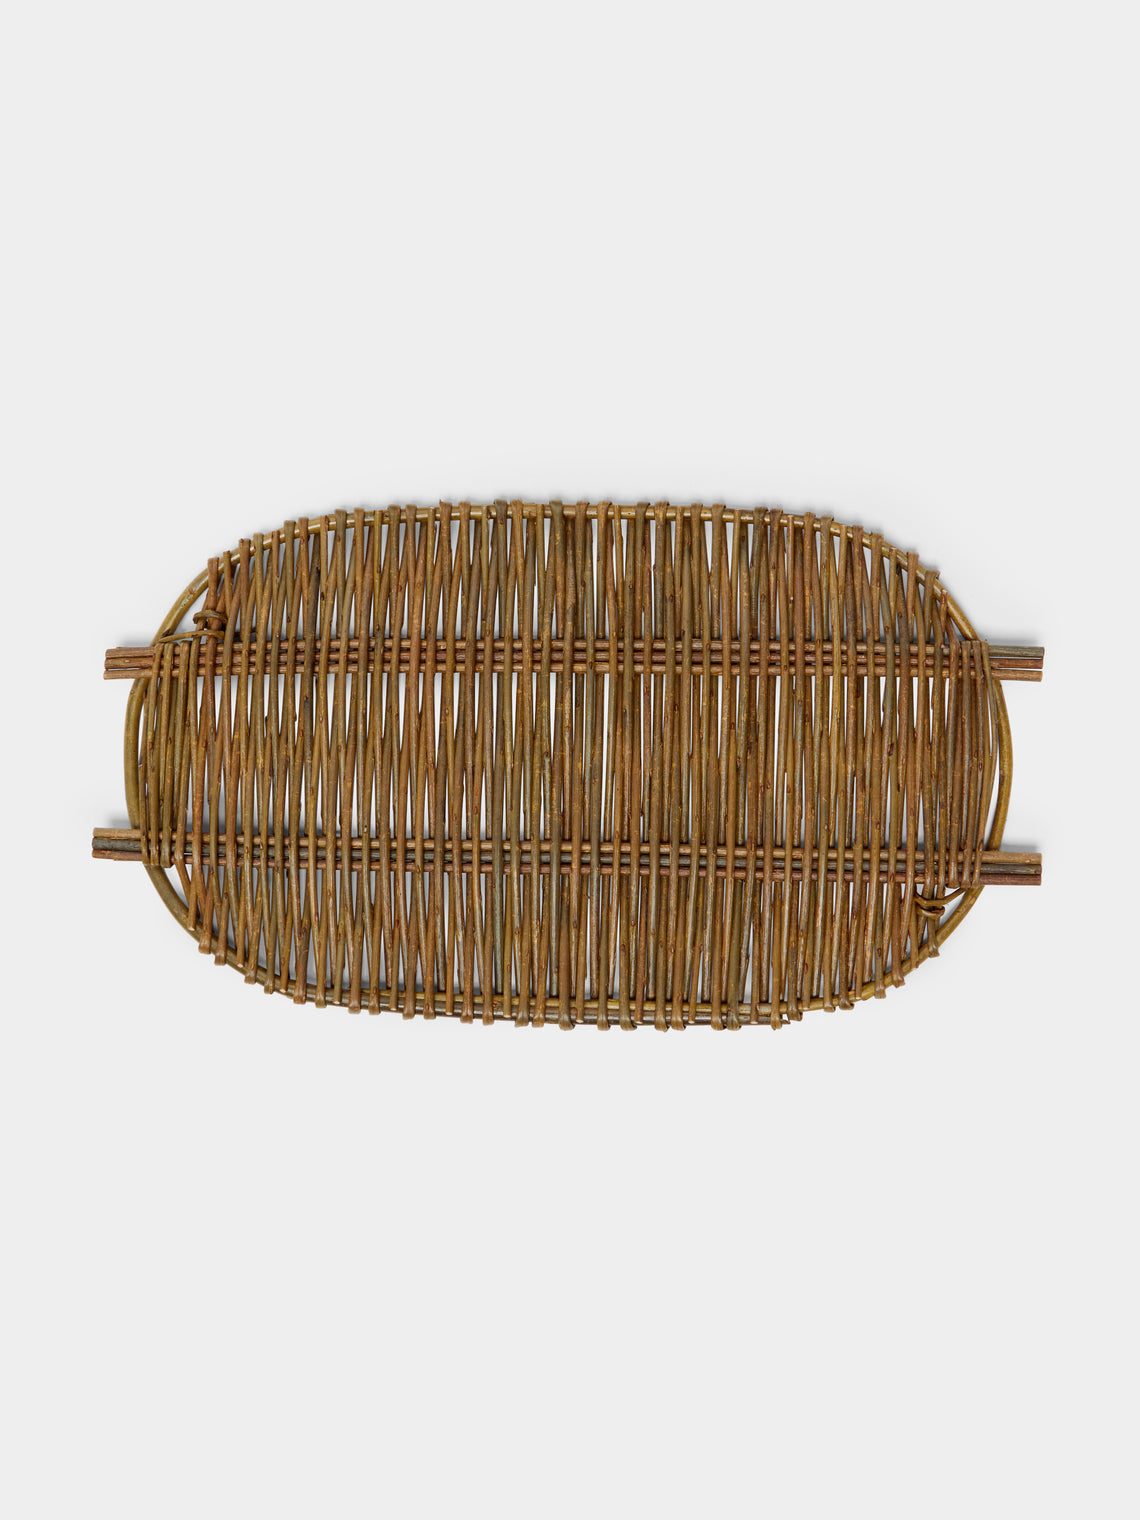 Hopewood Baskets - Handwoven Willow Tray -  - ABASK - 